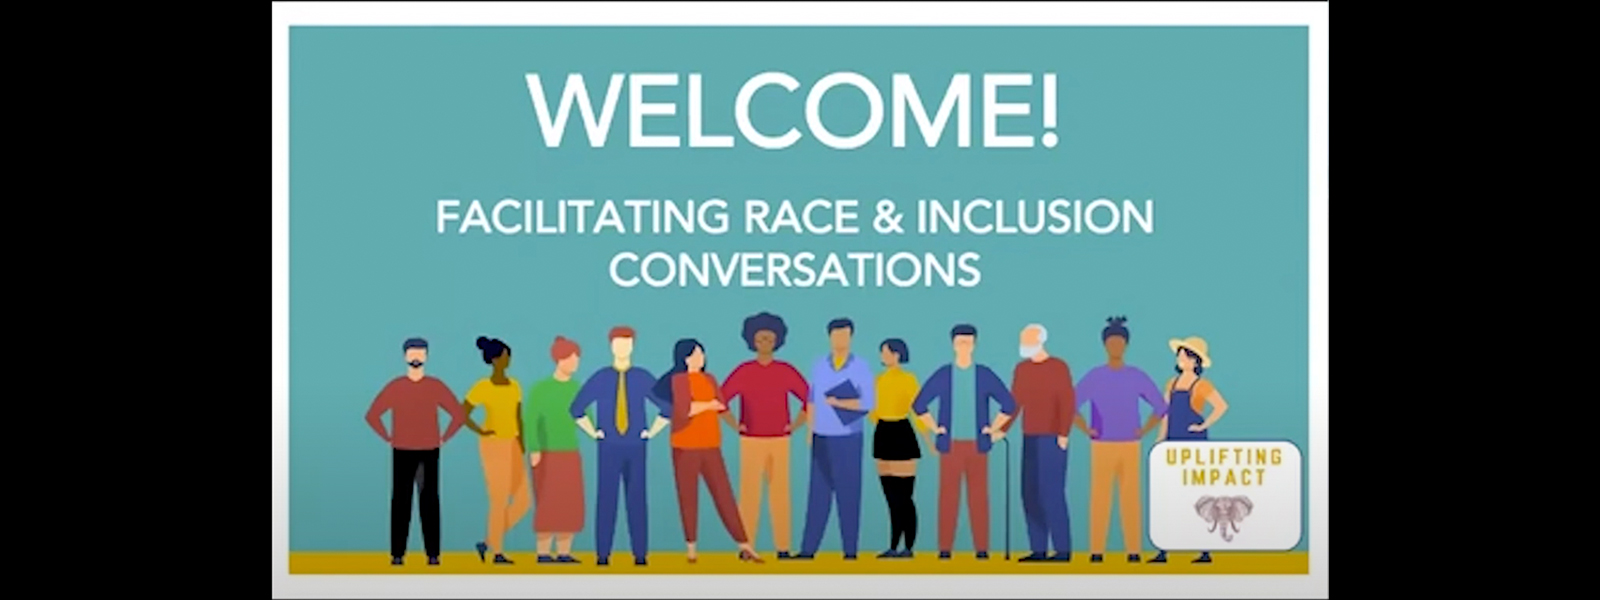 Welcome slide with group of people standing next to each other